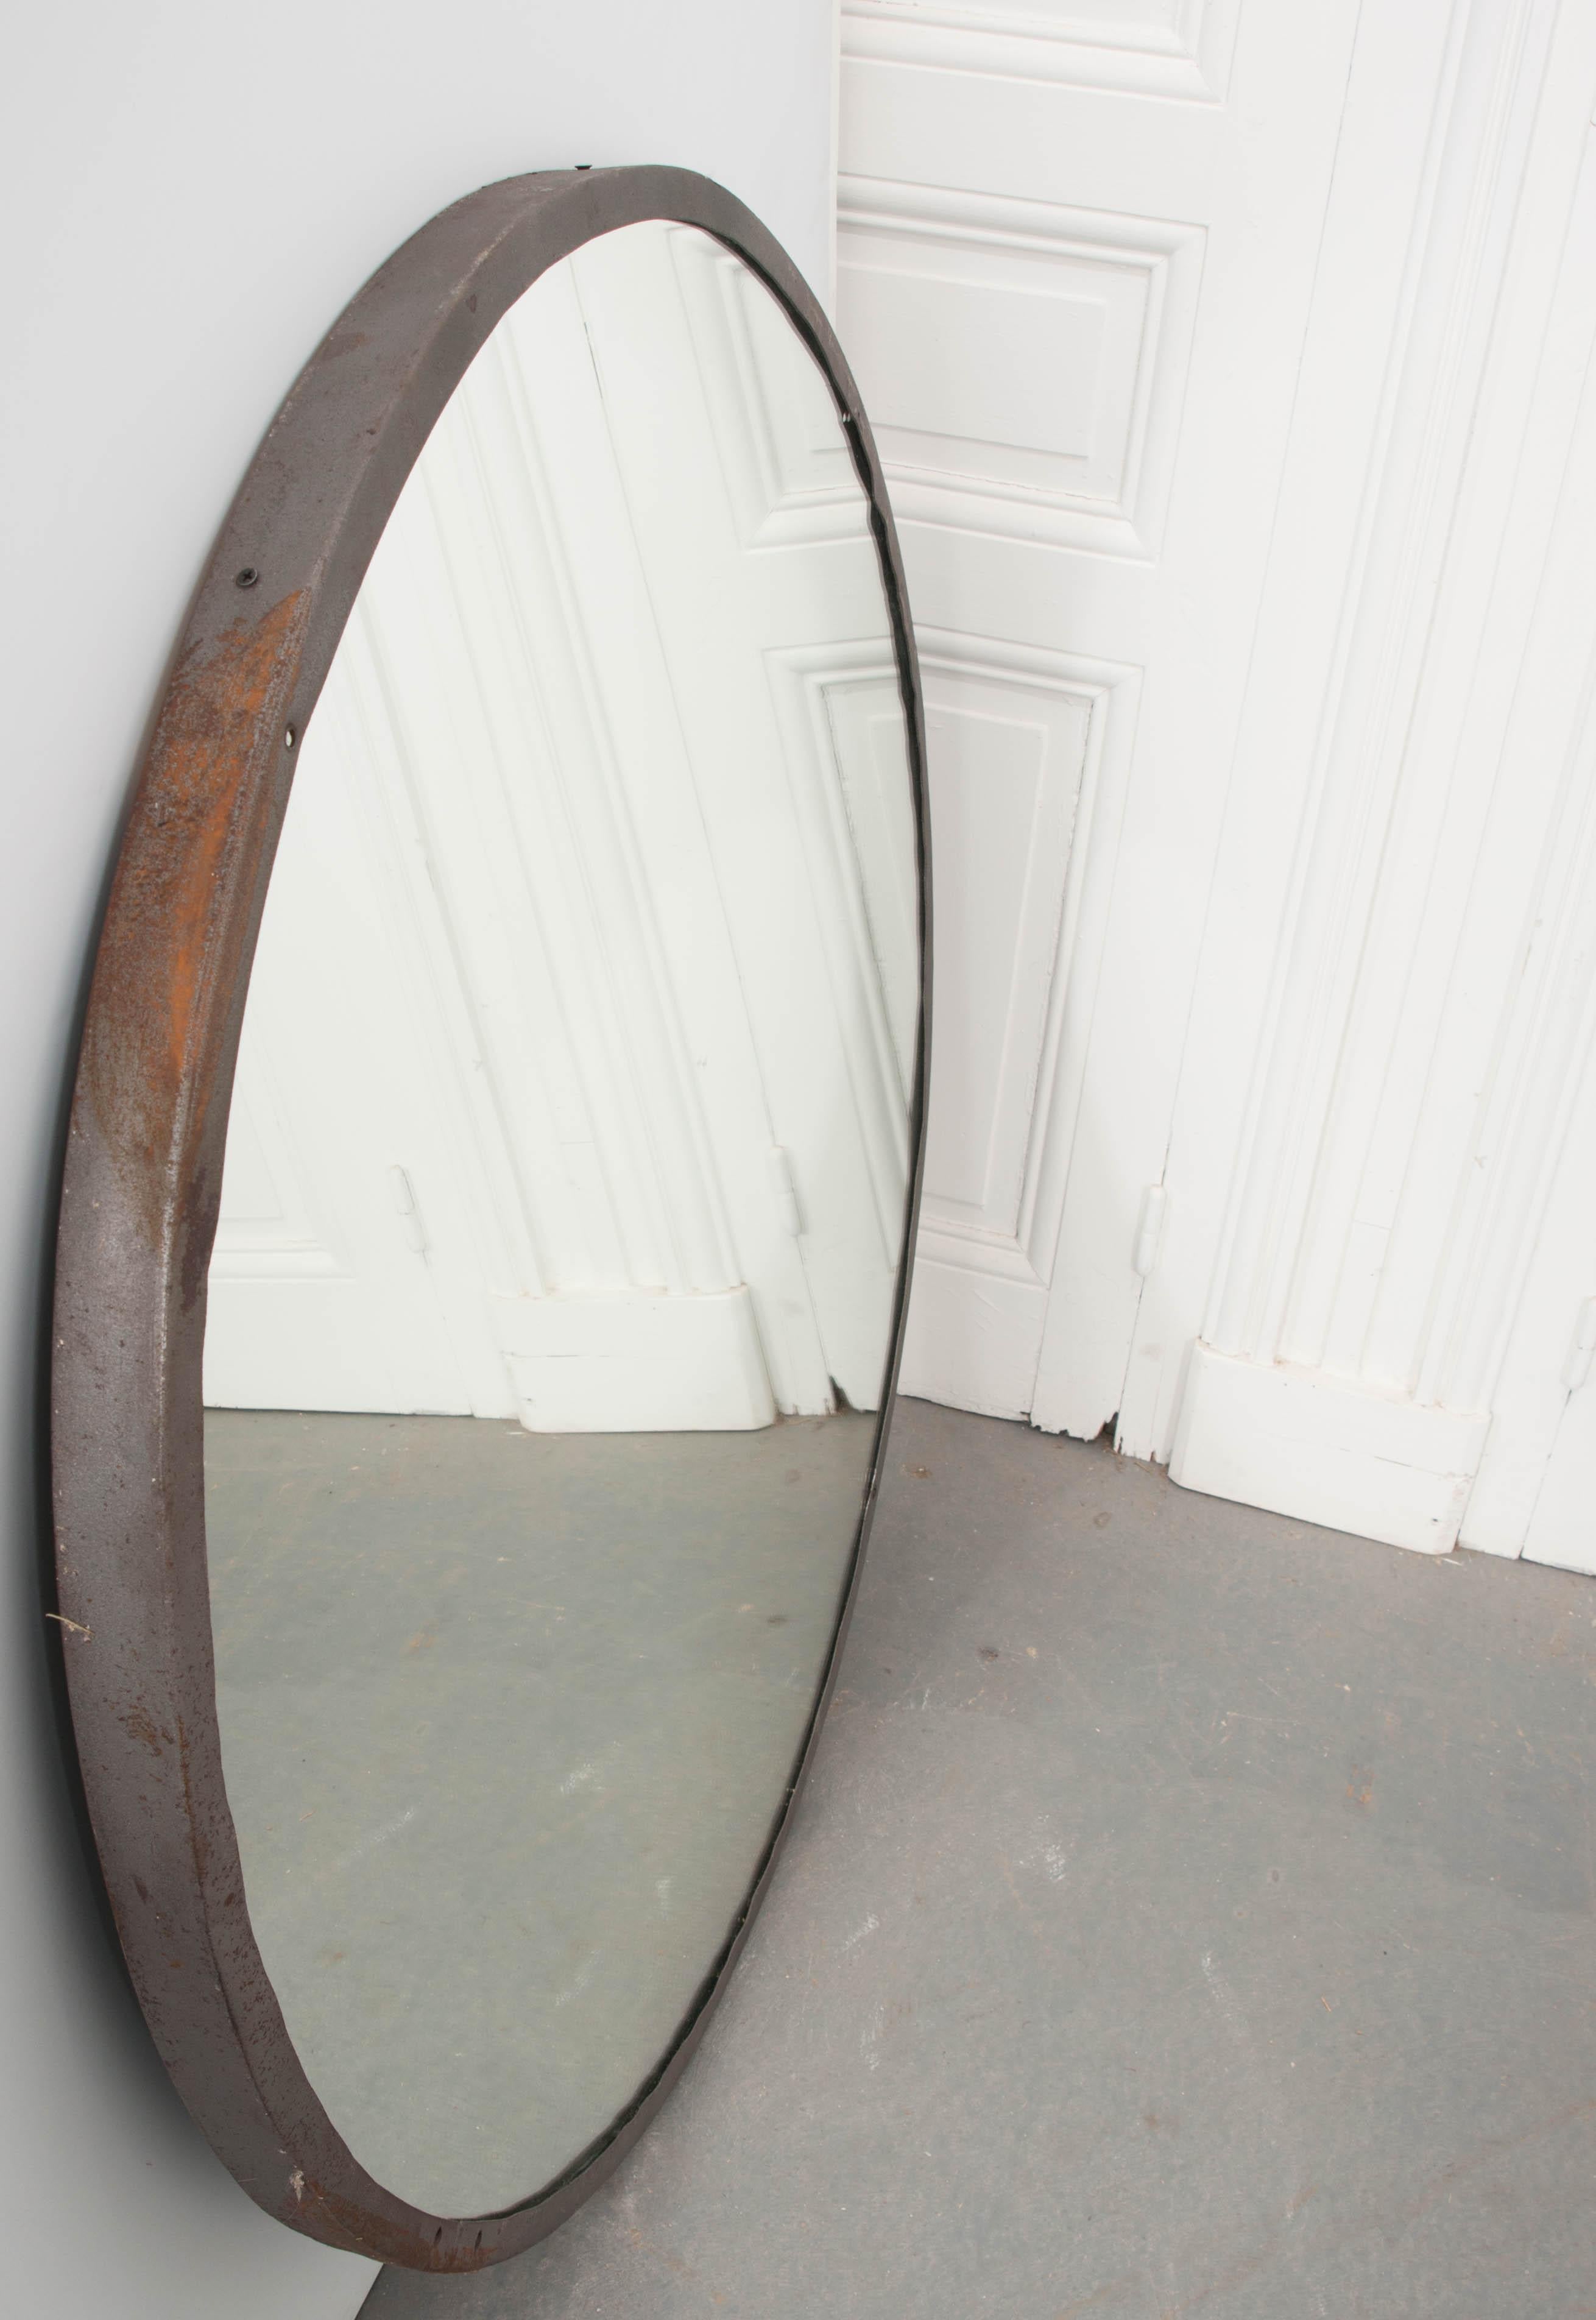 Vintage Round Mirrors with Metal Frames Are a Unique 2